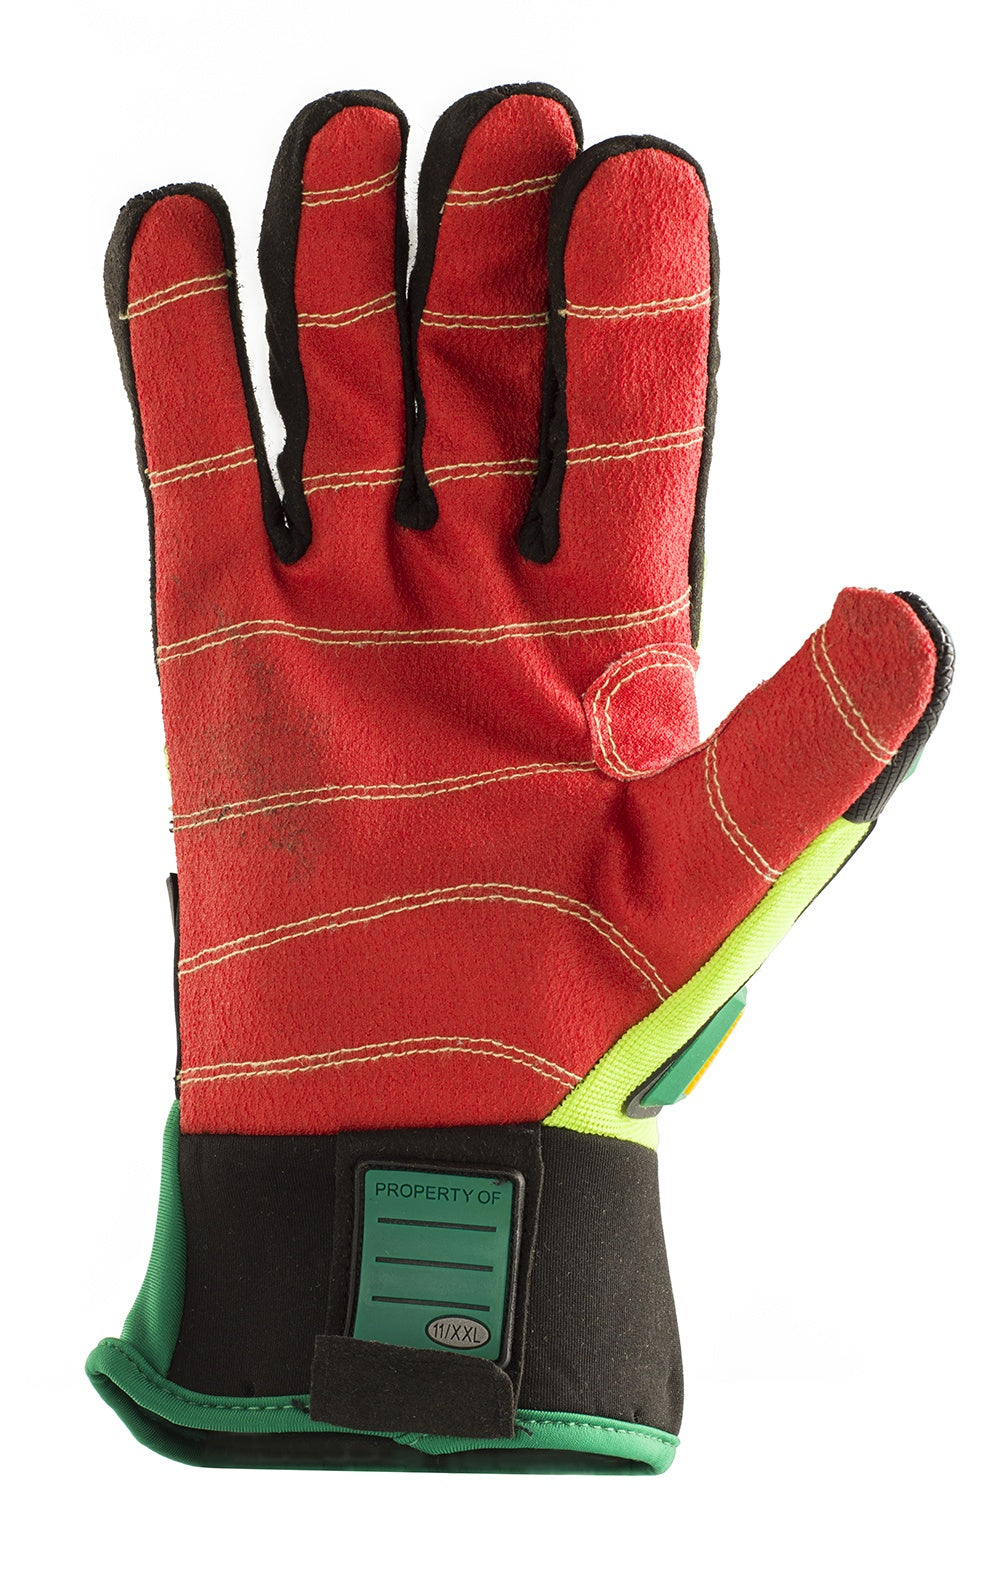 Roots RO50500 On Impact Rigger Gloves Keprotec Palm Size L